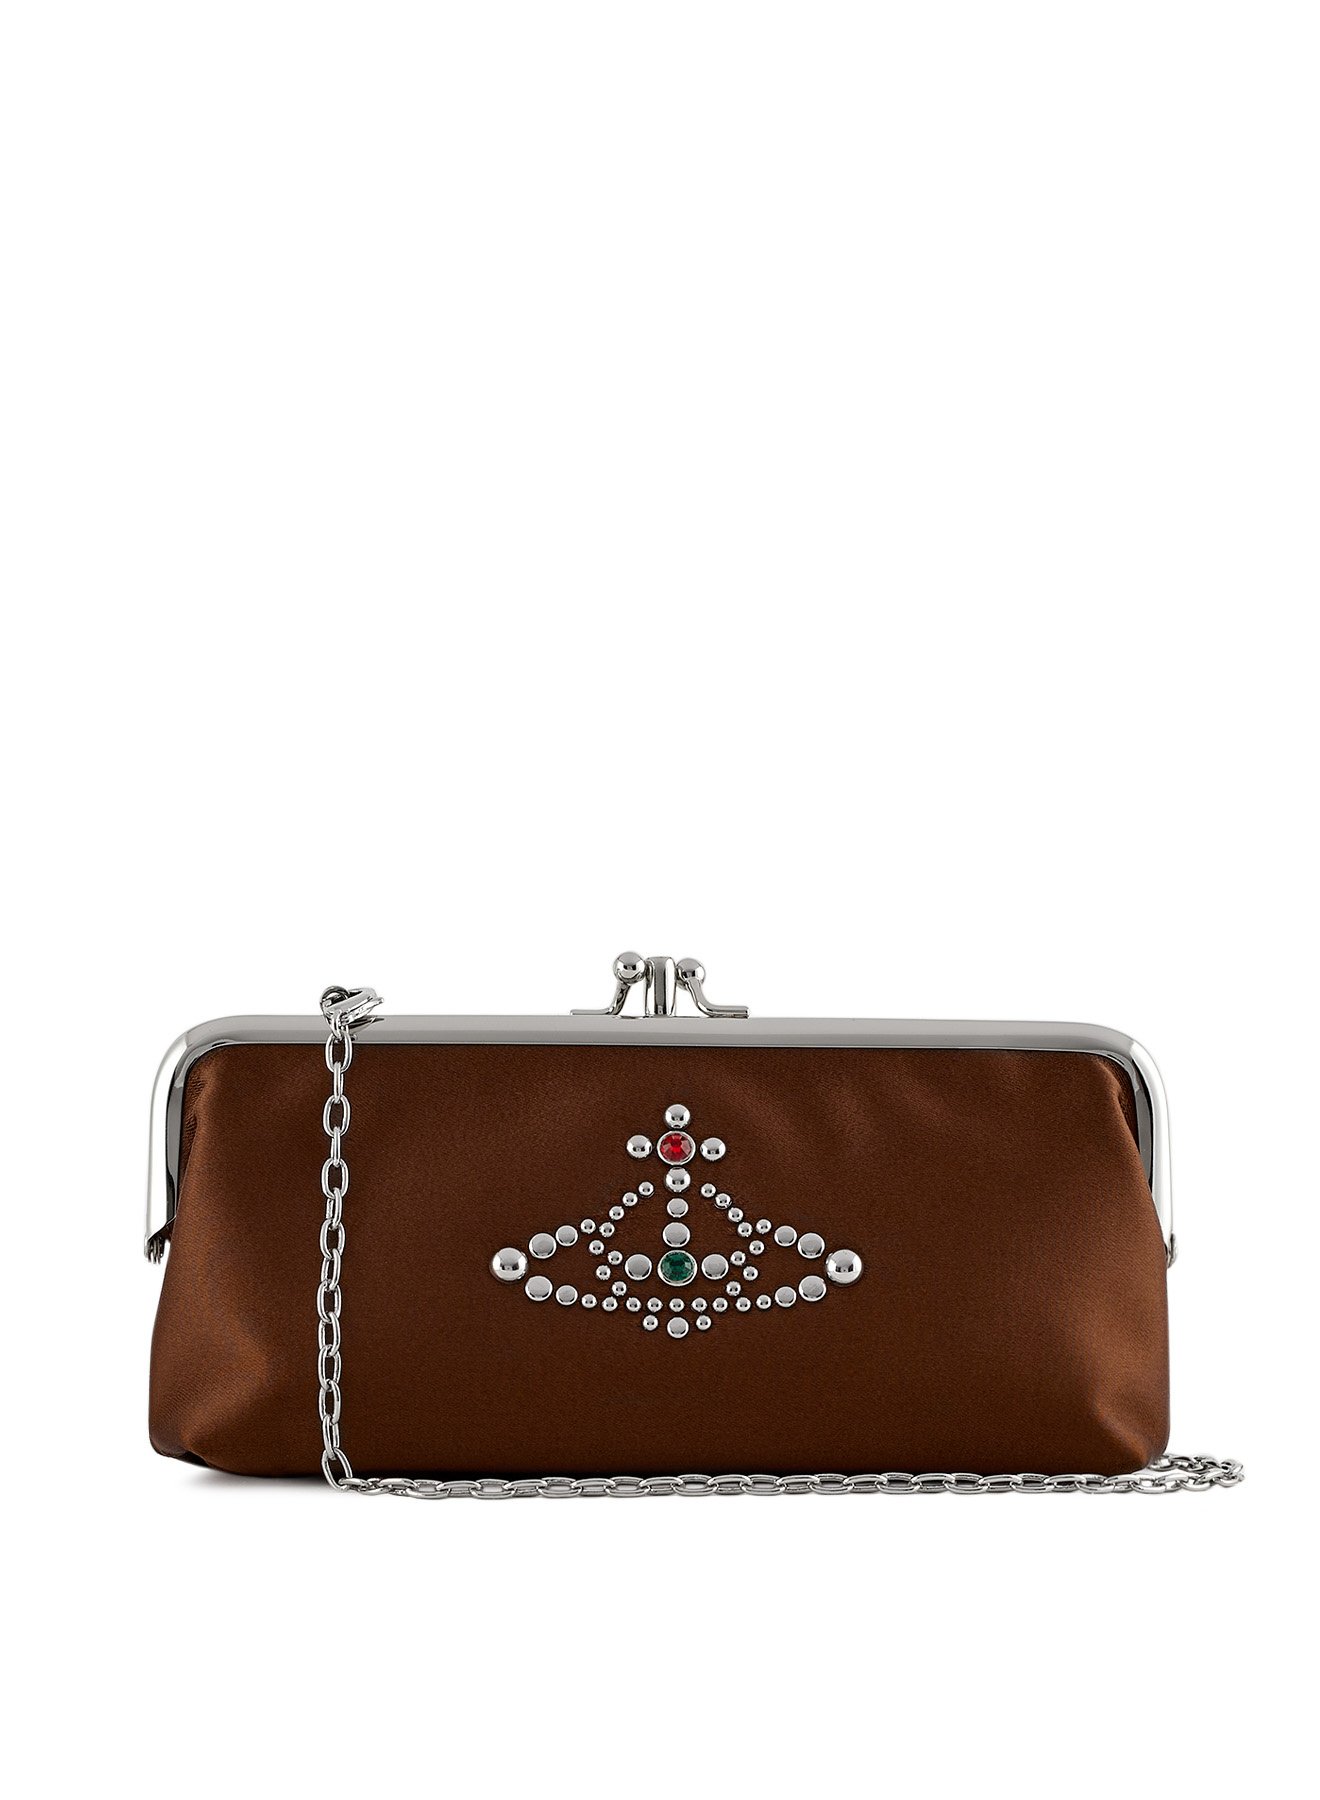 Vivienne Westwood Studs & Stones Purse With Chain Handle - Sunday Best